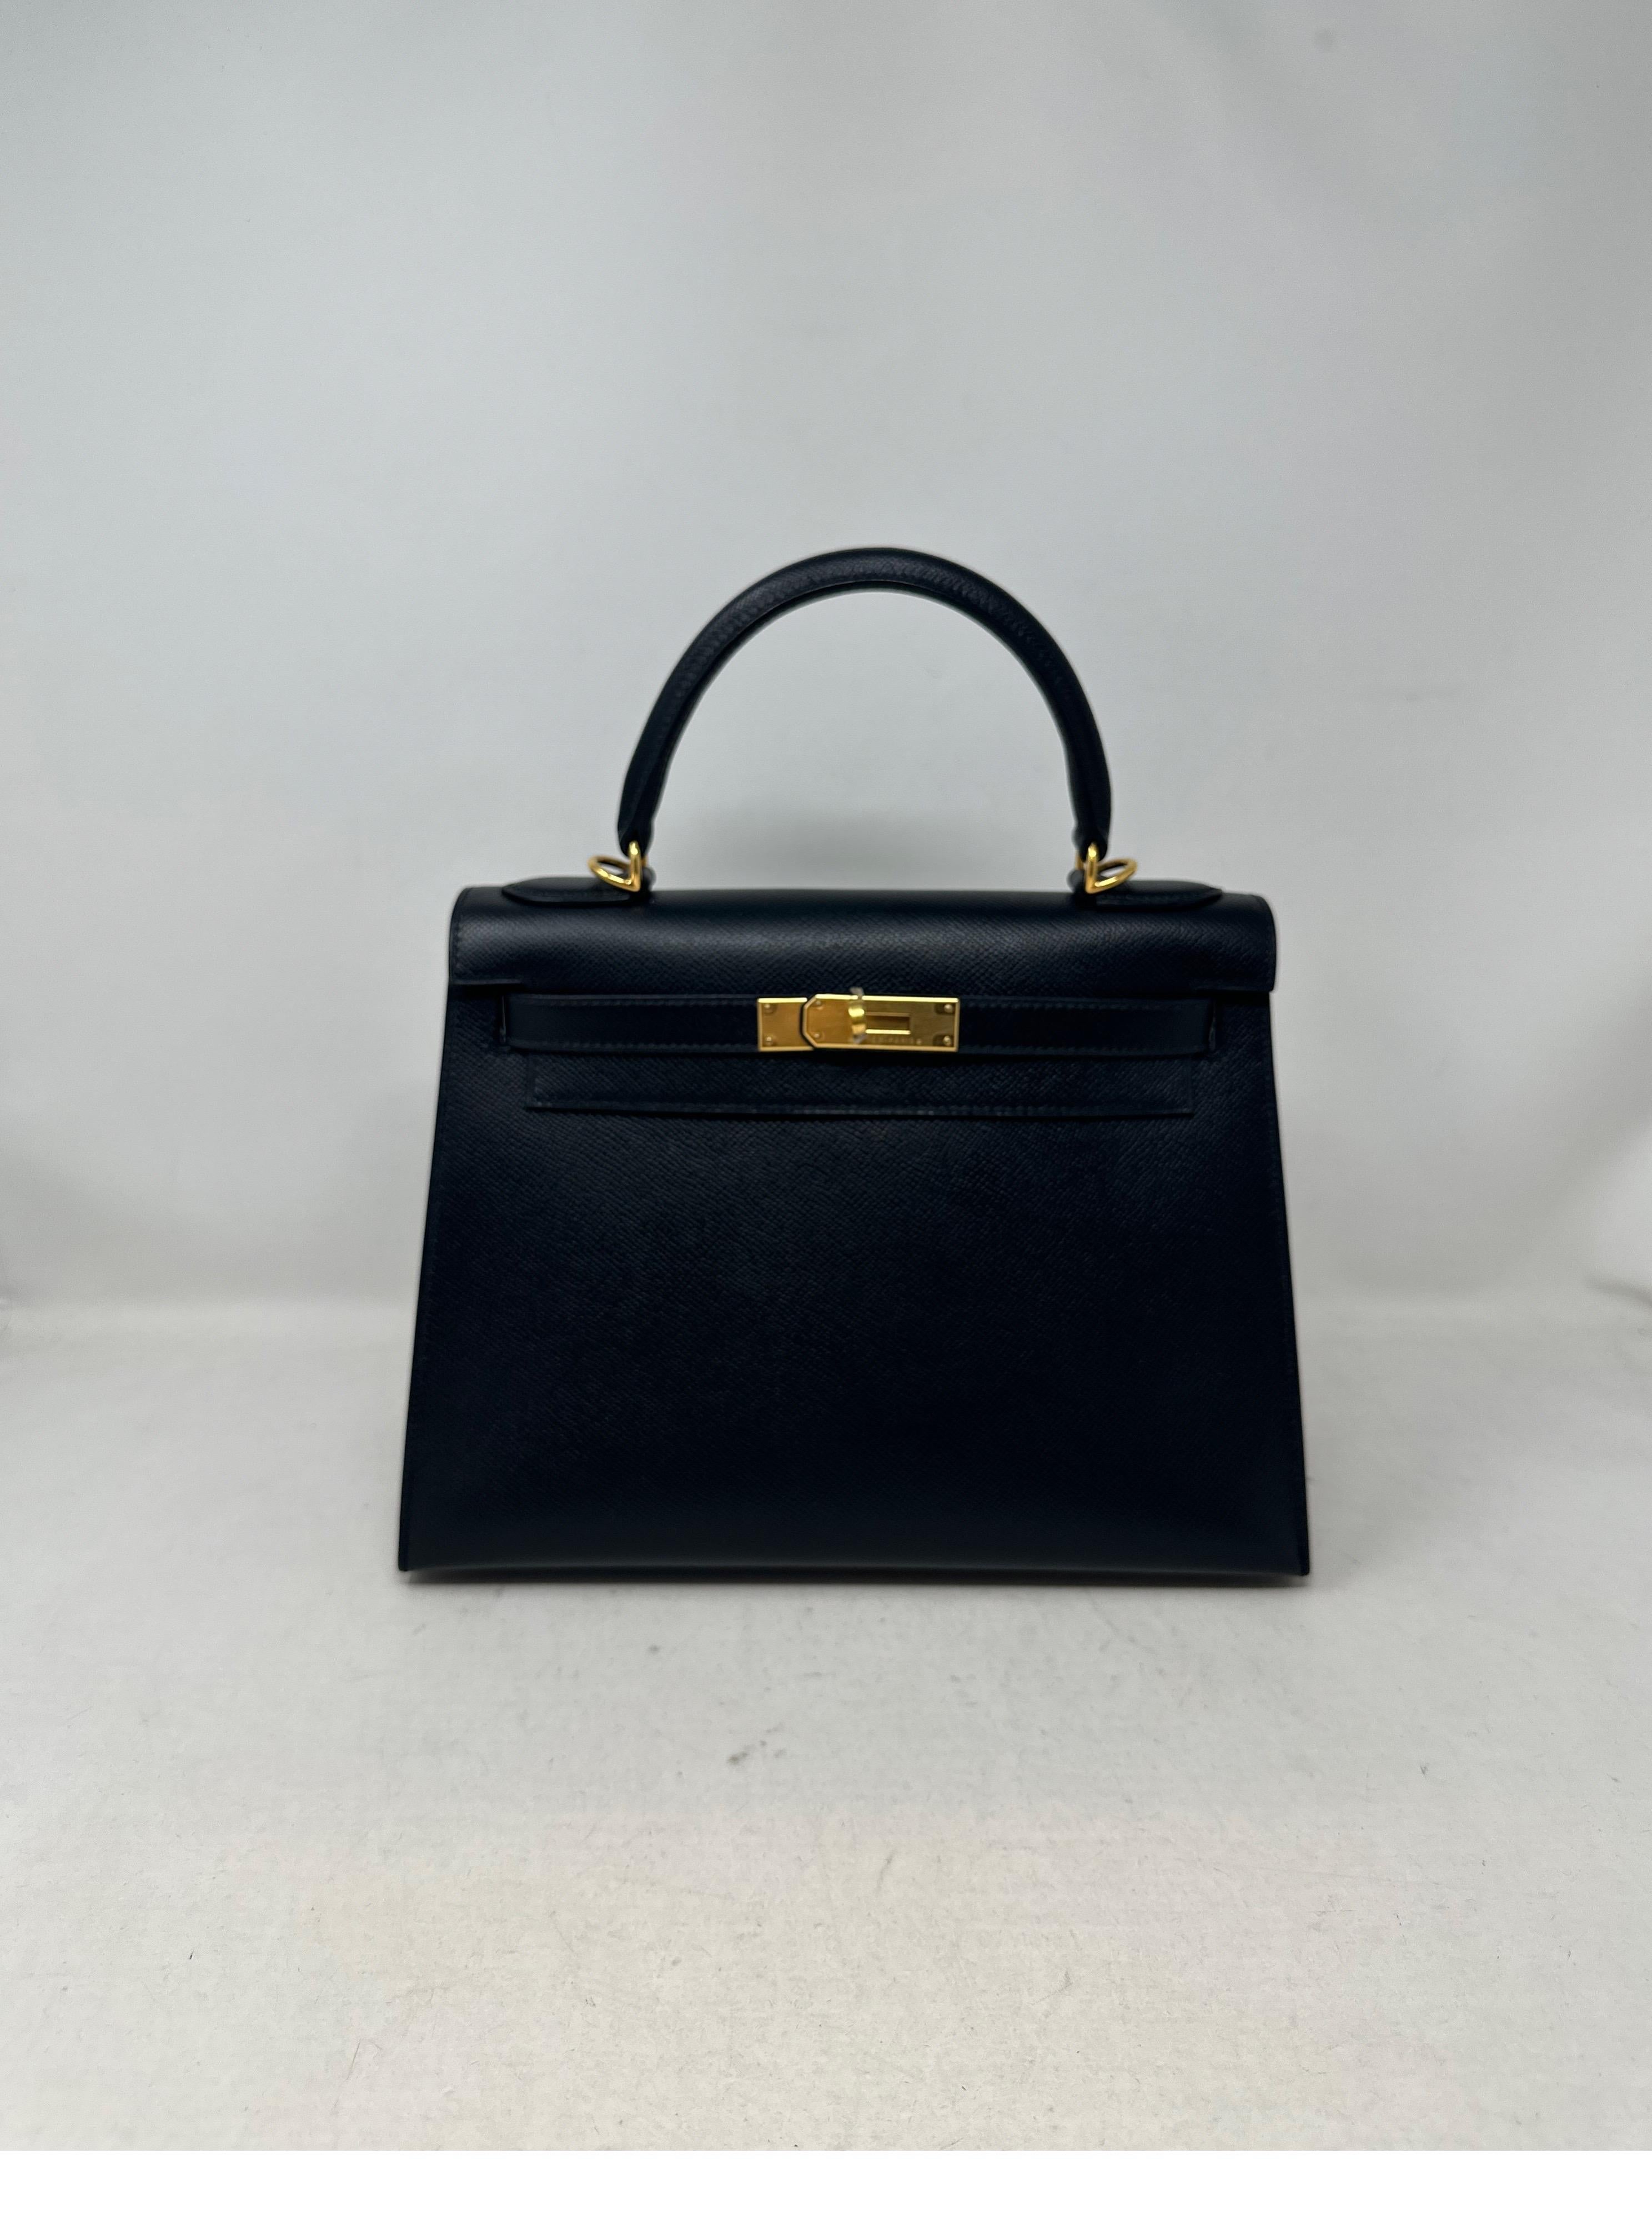 Hermes Black Kelly 28 Bag In Excellent Condition For Sale In Athens, GA